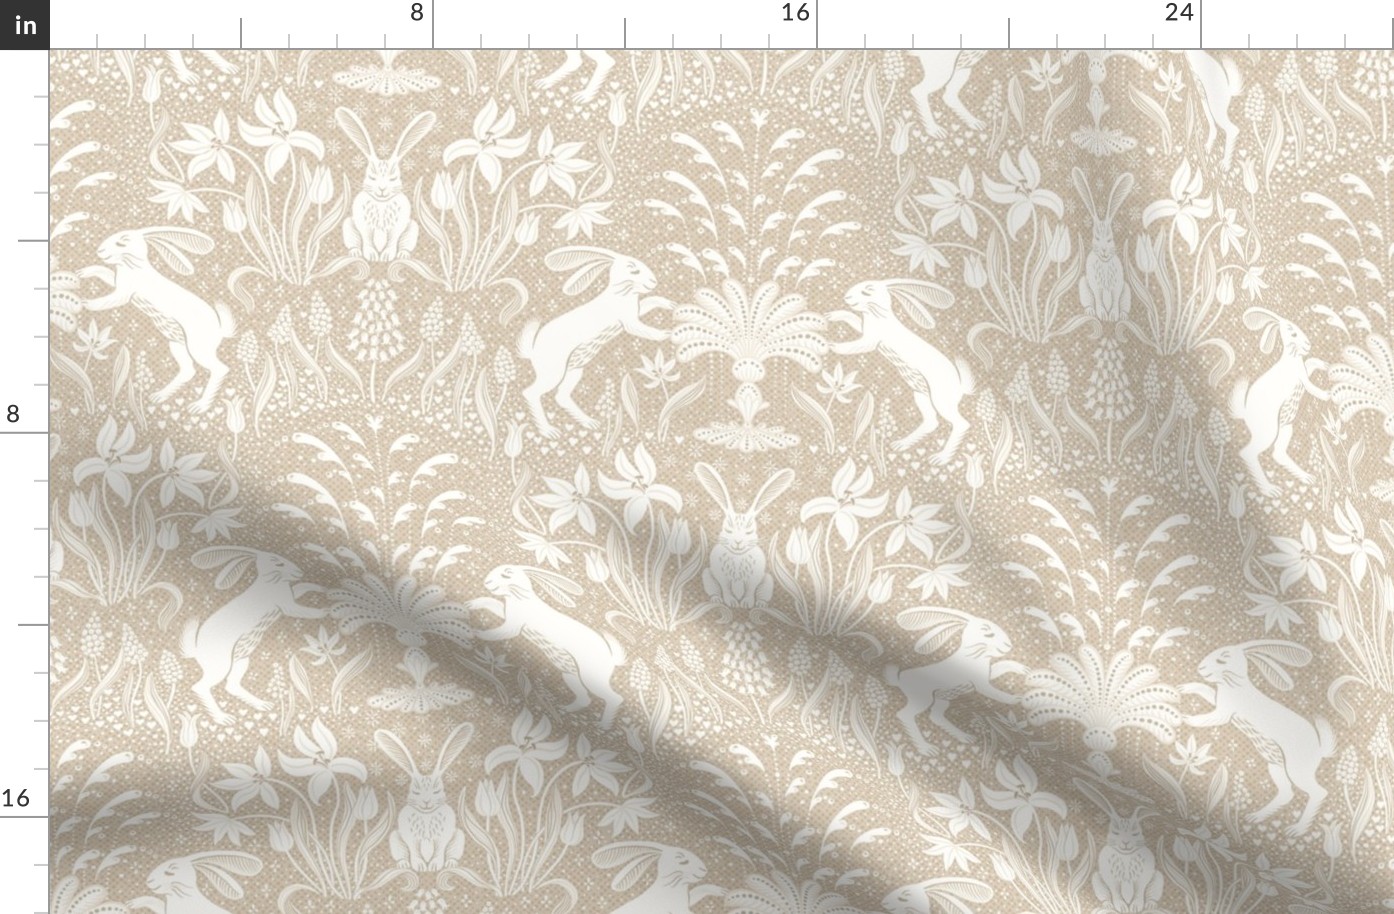 rabbits at the fountain / light natural tan and cream white- medium scale